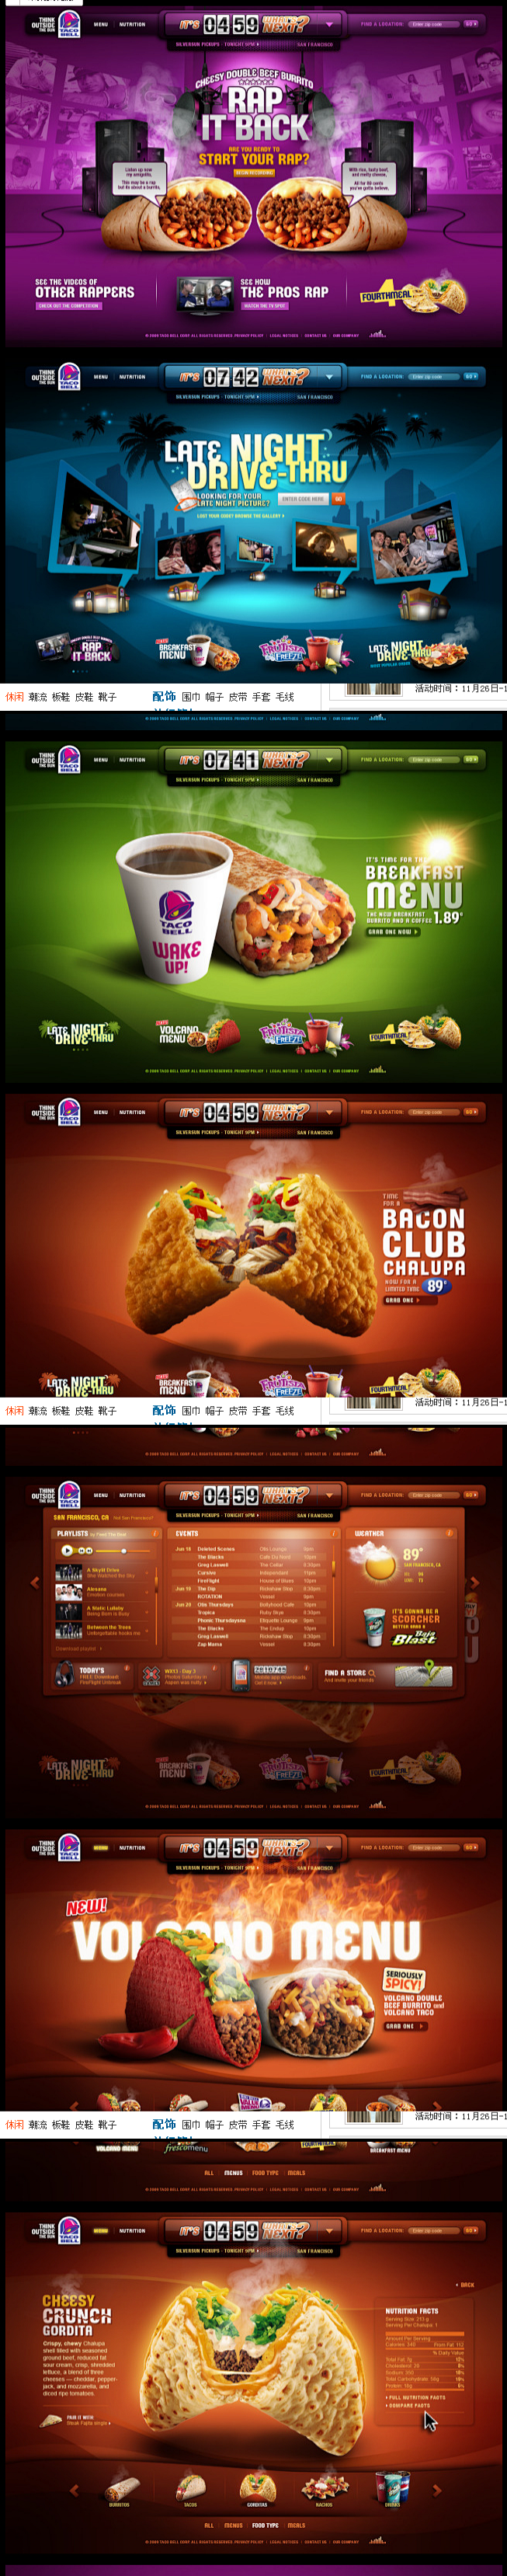 Taco Bell Site Redes...